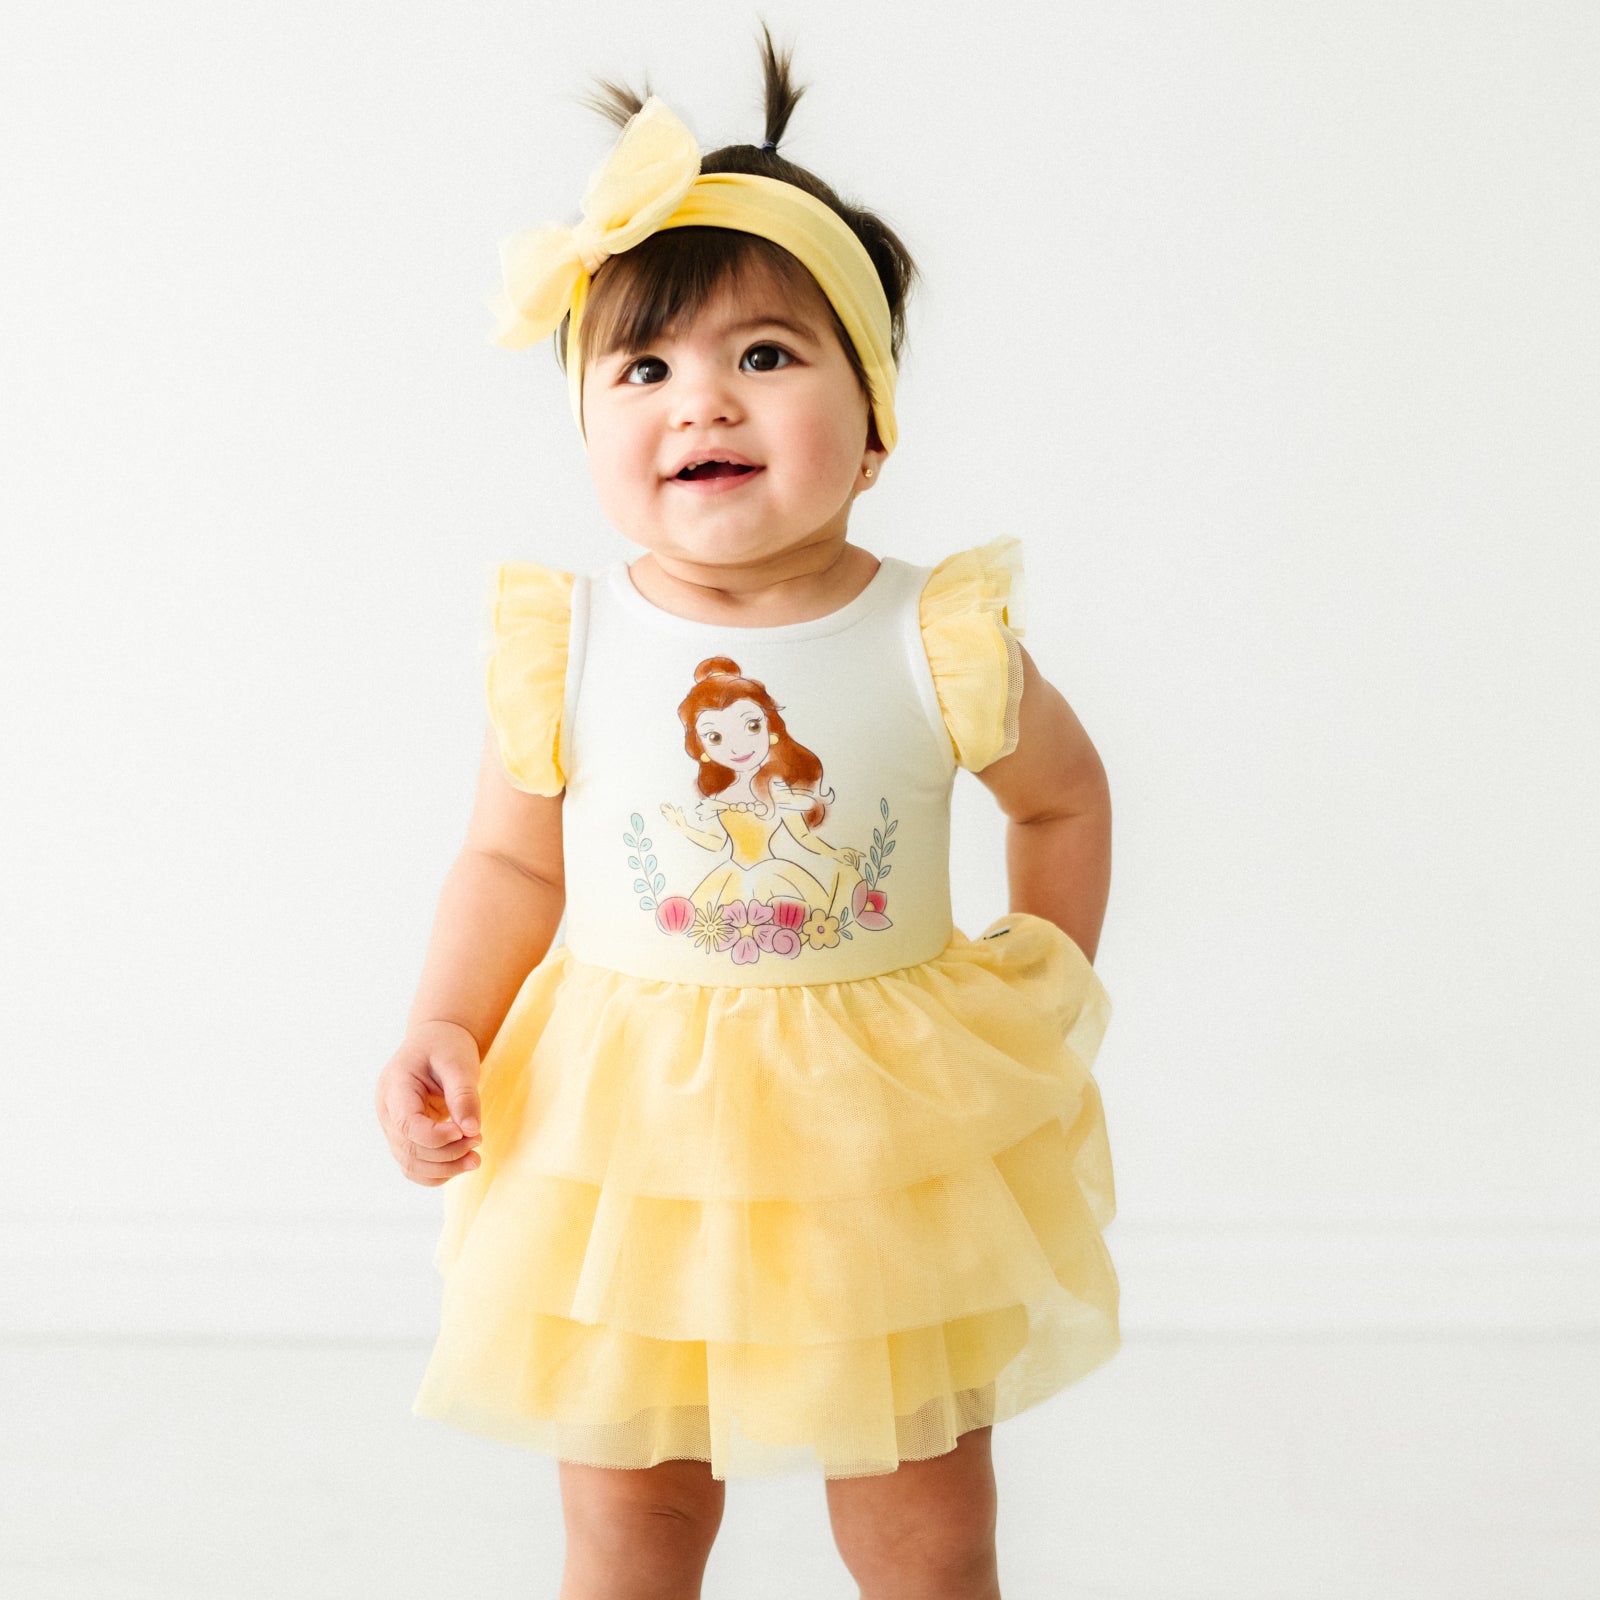 Child wearing a Yellow tulle luxe bow headband and matching dress